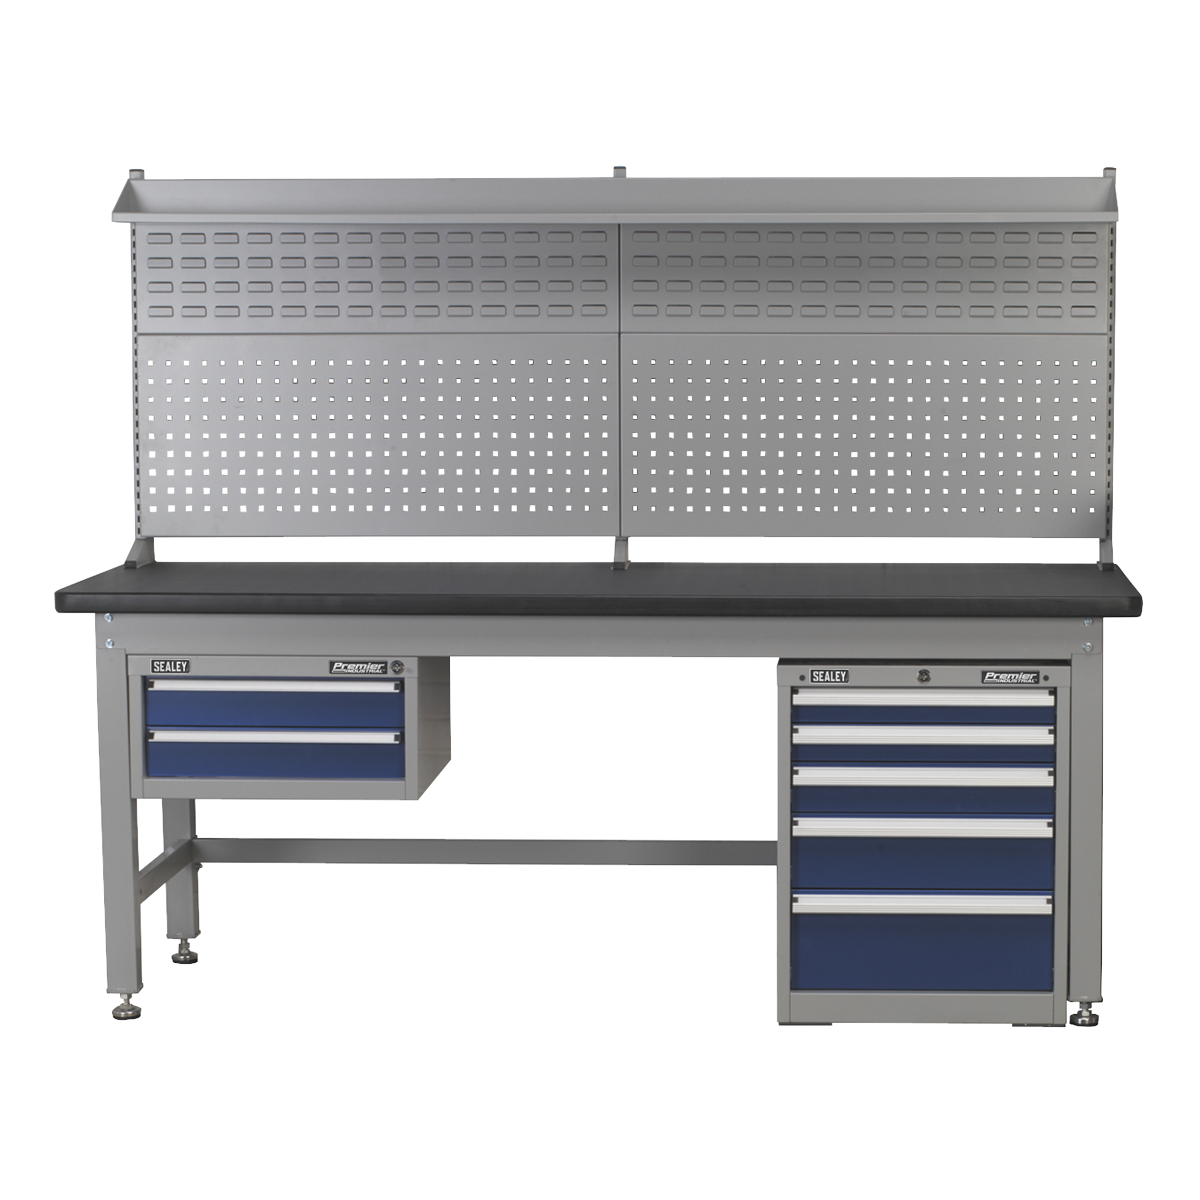 1.8m Complete Industrial Workstation & Cabinet Combo - API1800COMB02 - Farming Parts